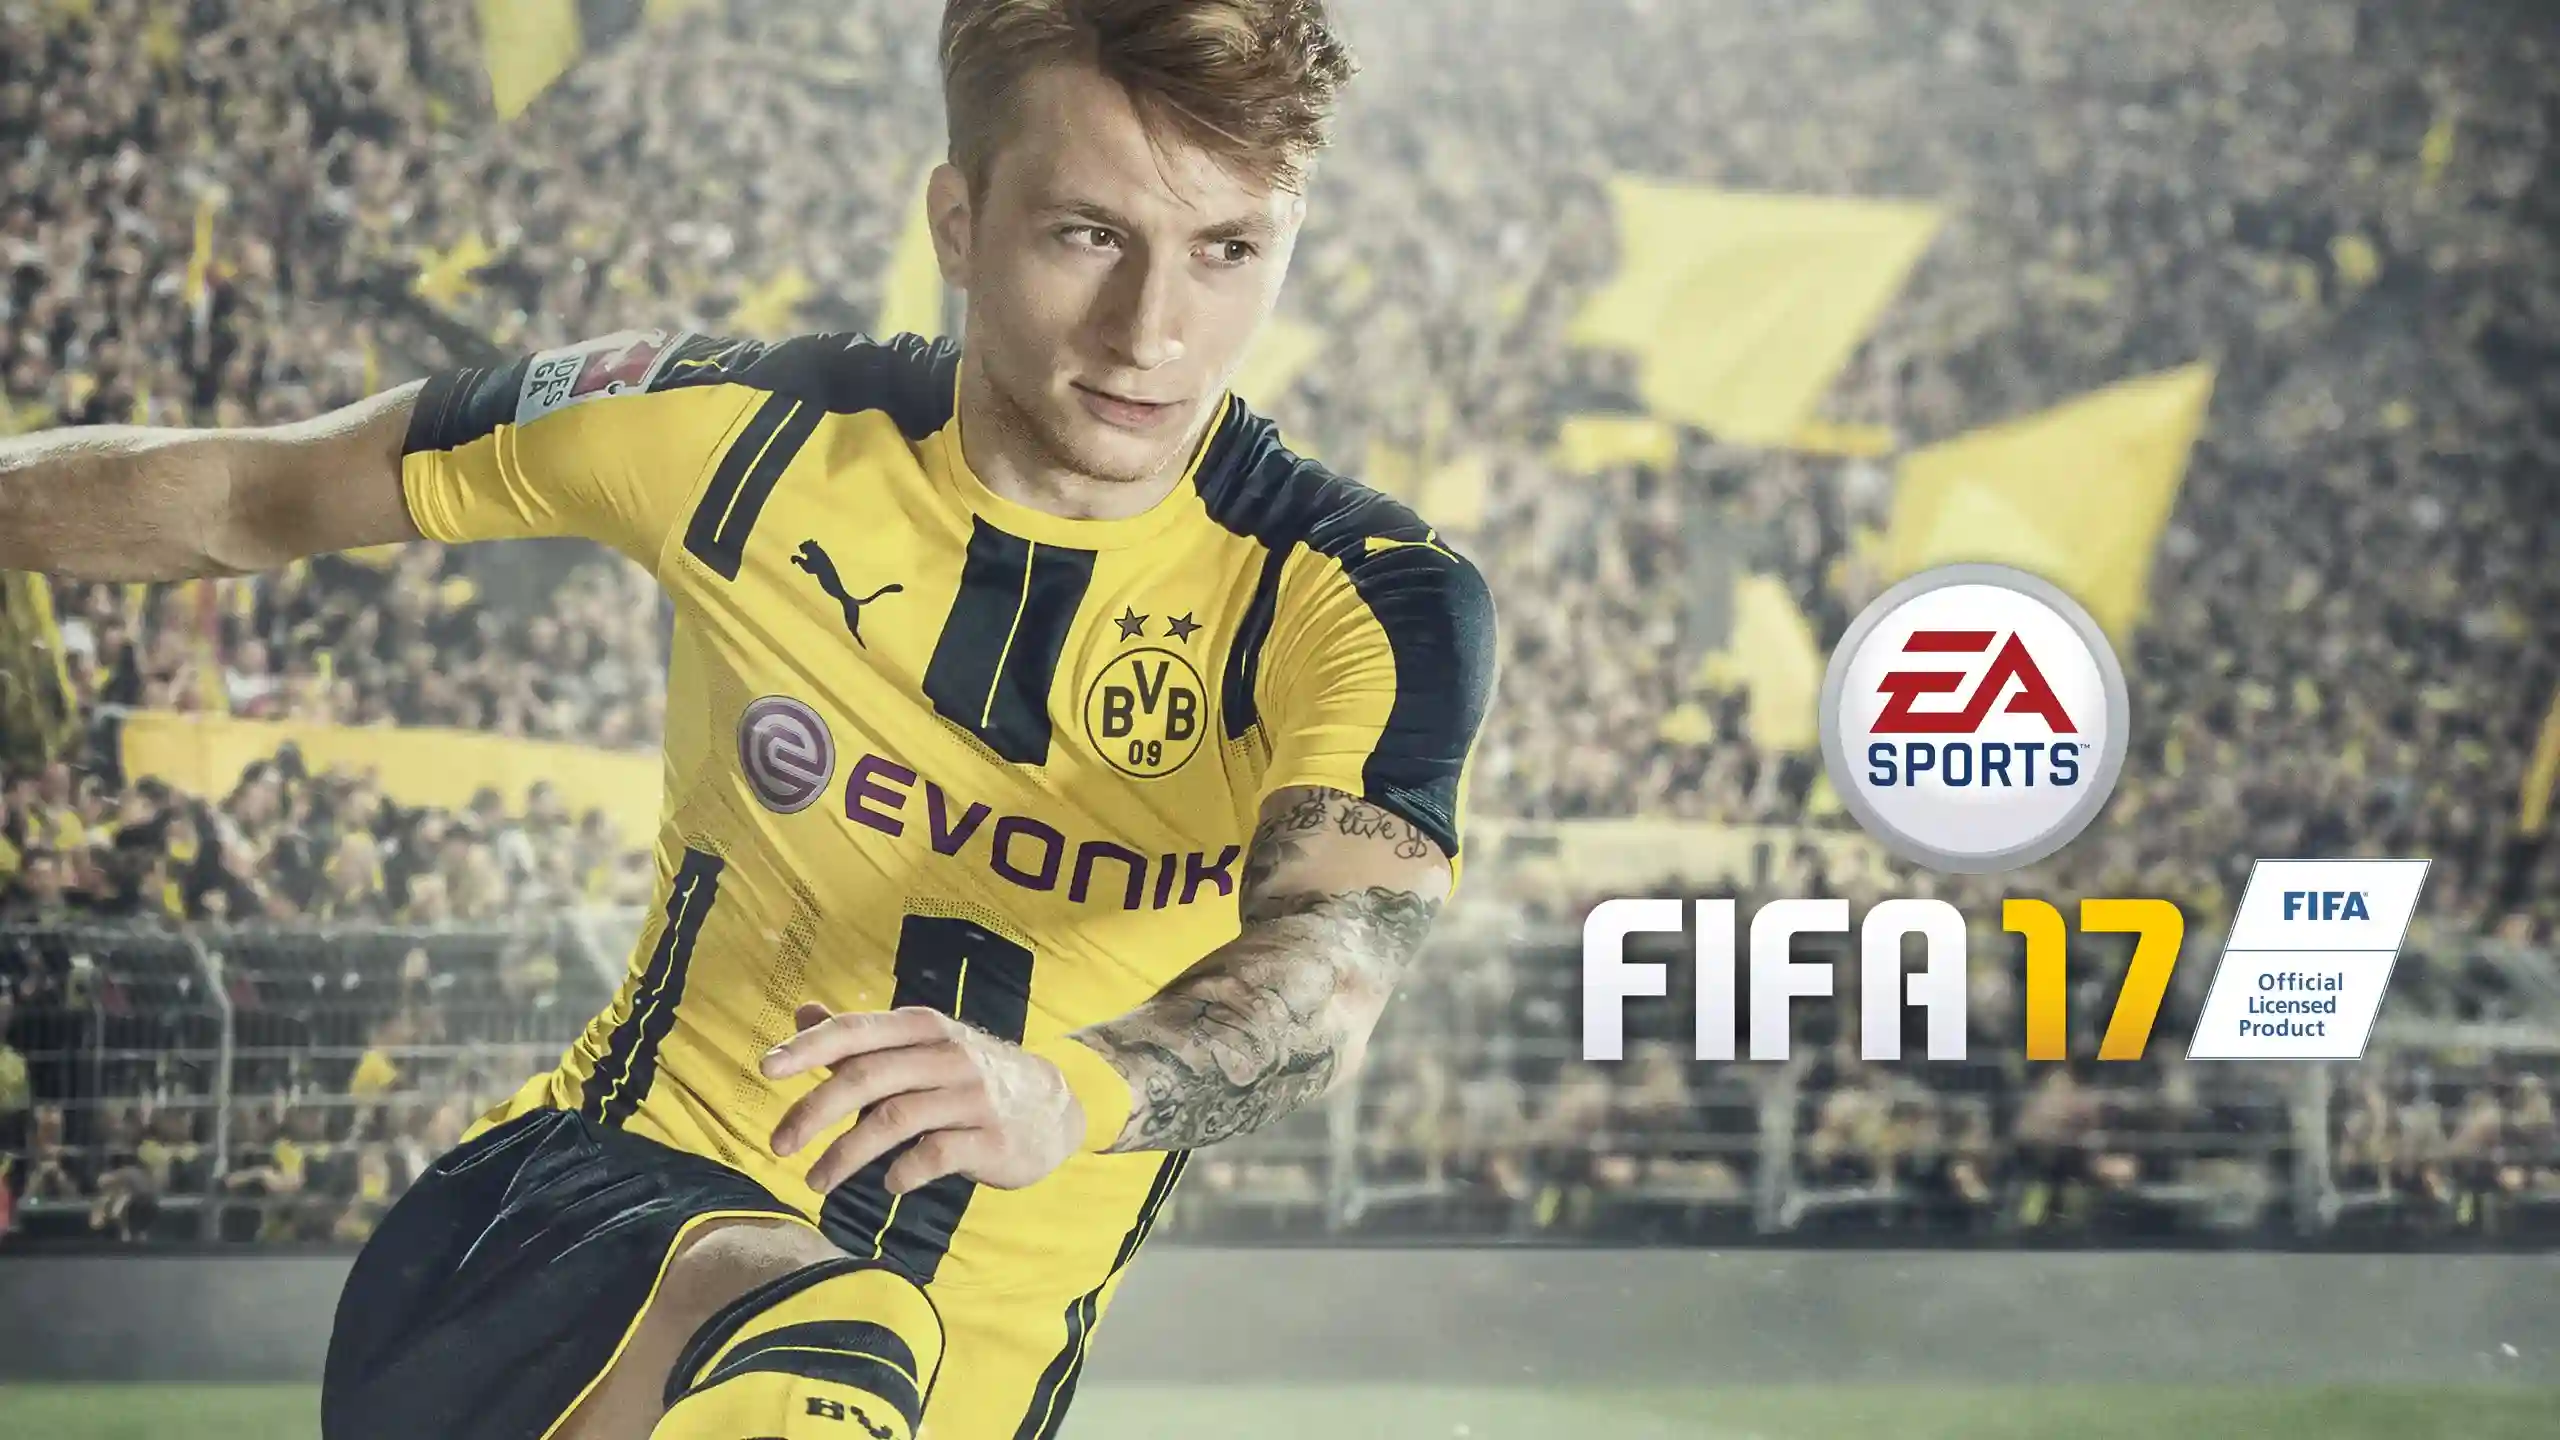 FIFA14 updated to FIFA17